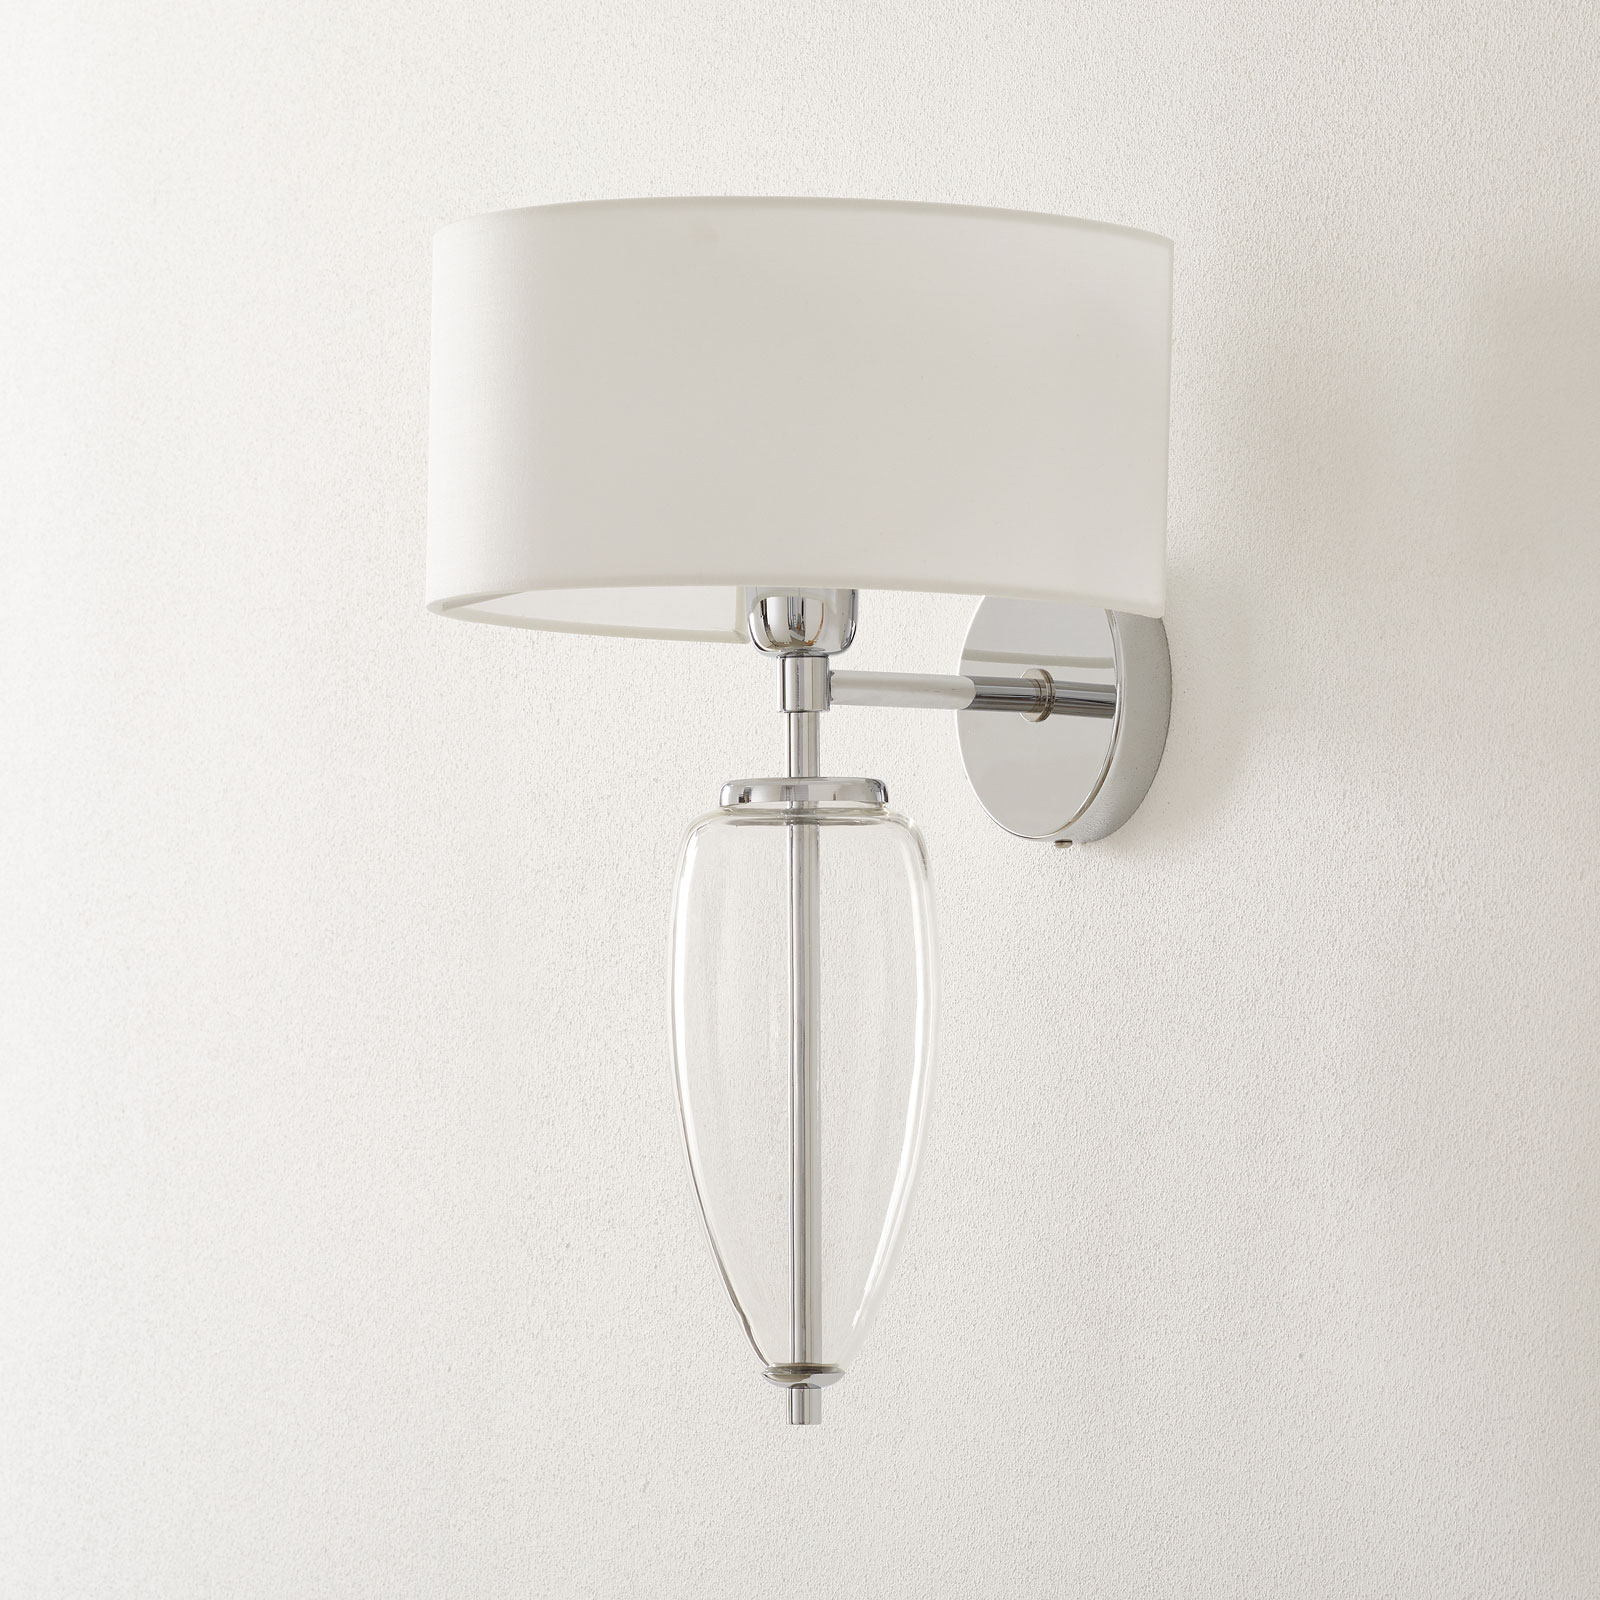 Show Ogiva wall lamp with clear glass element